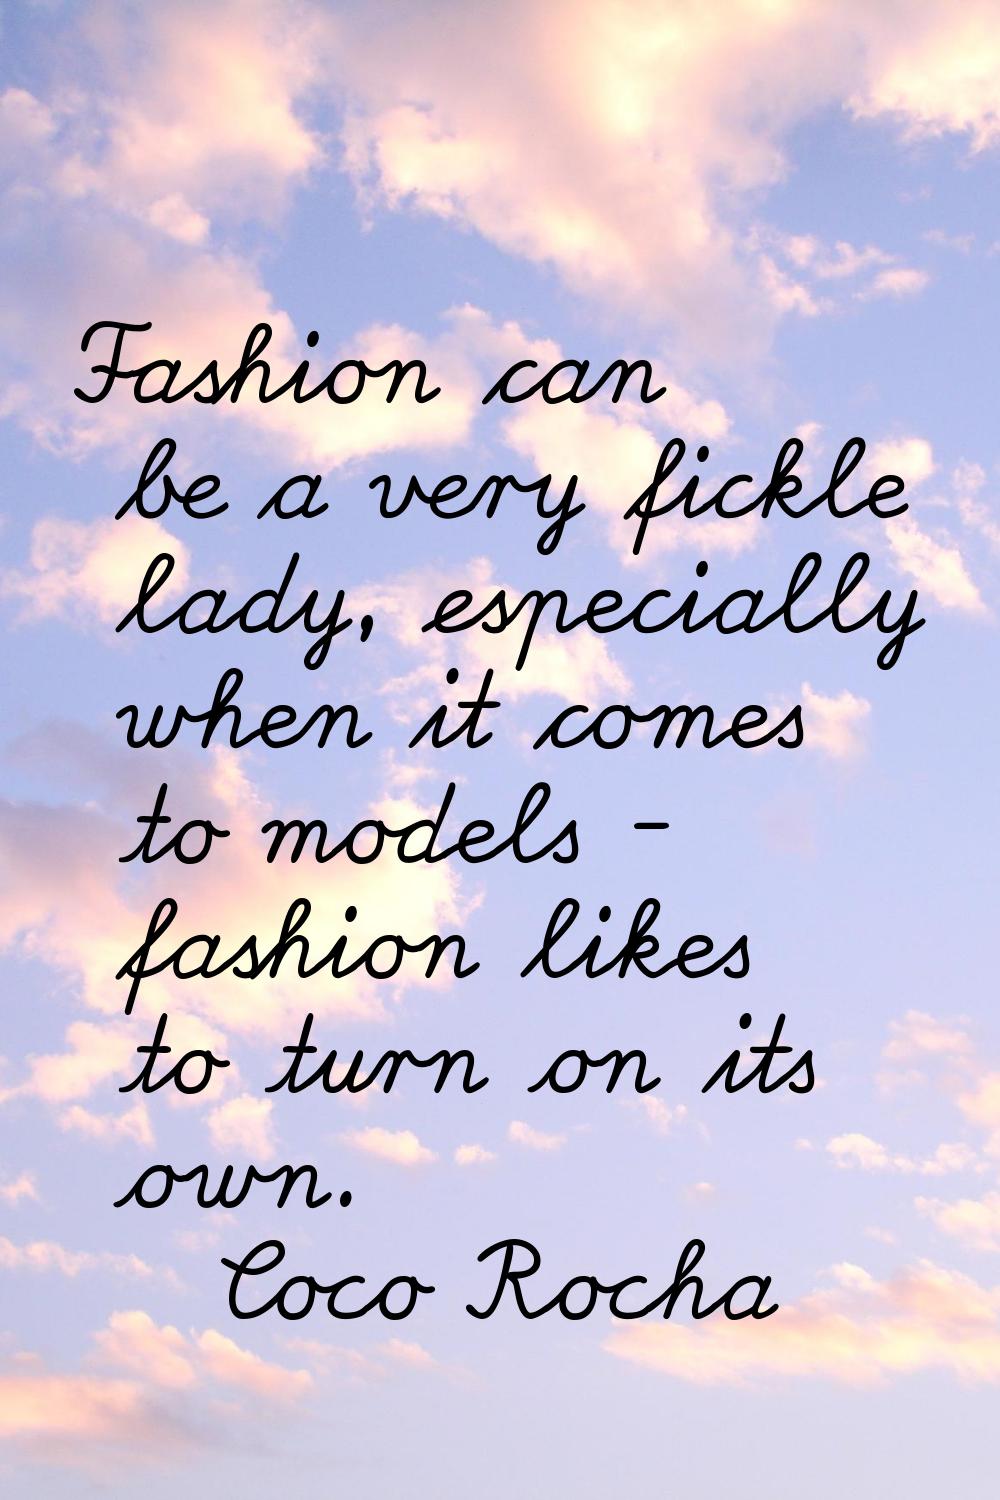 Fashion can be a very fickle lady, especially when it comes to models - fashion likes to turn on it